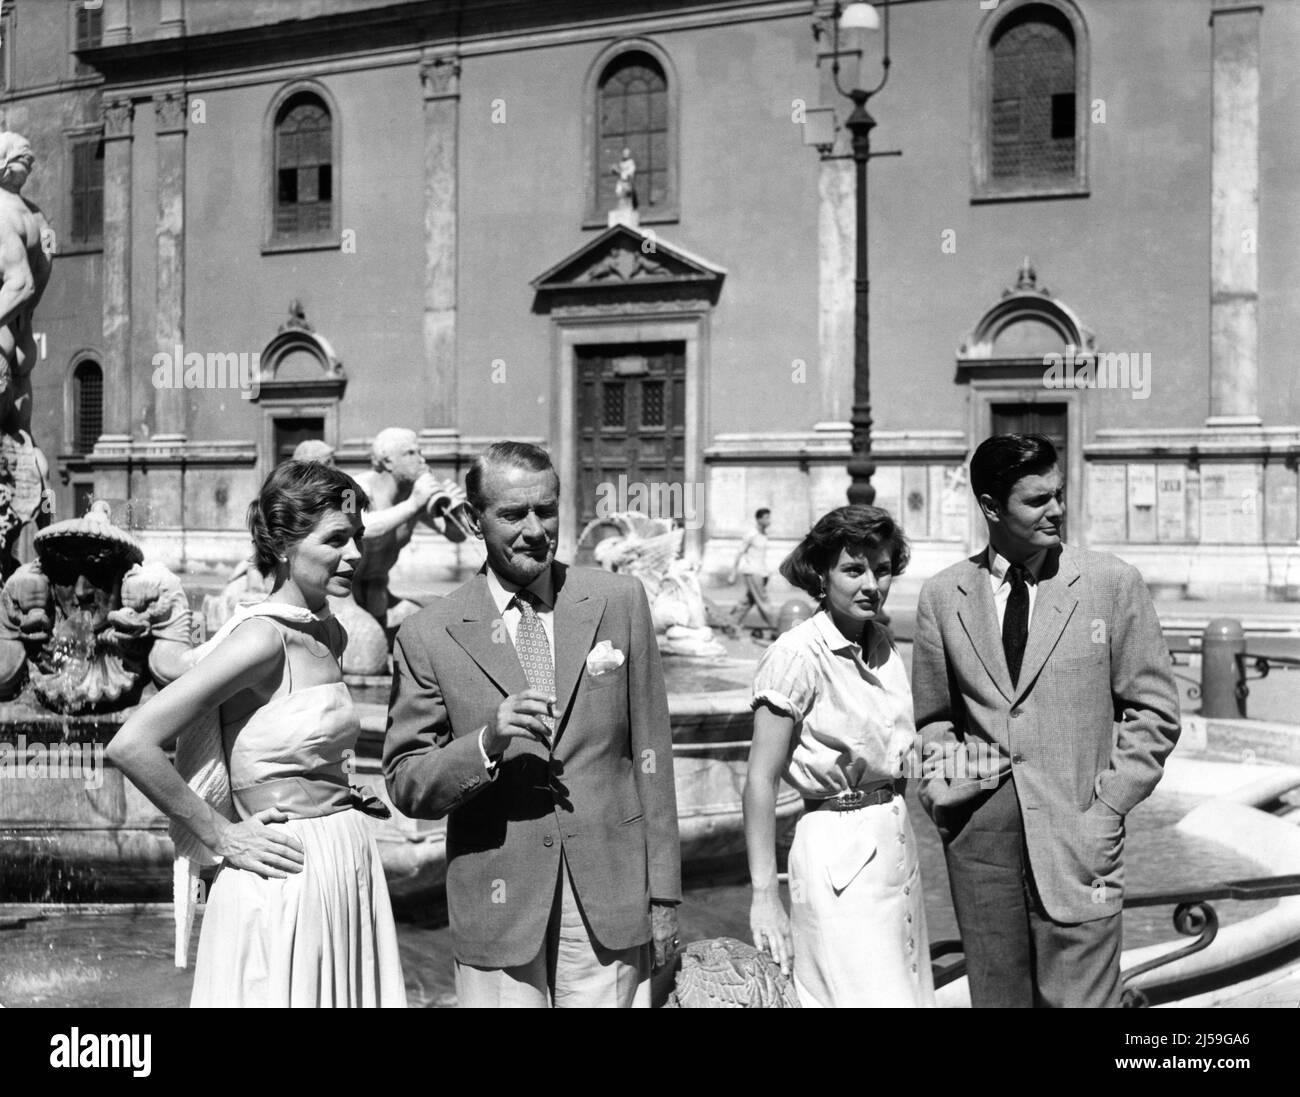 DOROTHY McGUIRE CLIFTON WEBB JEAN PETERS and LOUIS JORDAN on set location candid in August 1953 near the Trevi Fountain in Rome during filming of THREE COINS IN THE FOUNTAIN 1954 director JEAN NEGULESCO novel John H. Secondari screenplay John Patrick costumes designed by Dorothy Jeakins music Victor Young producer Sol C. Siegel Twentieth Century Fox Stock Photo